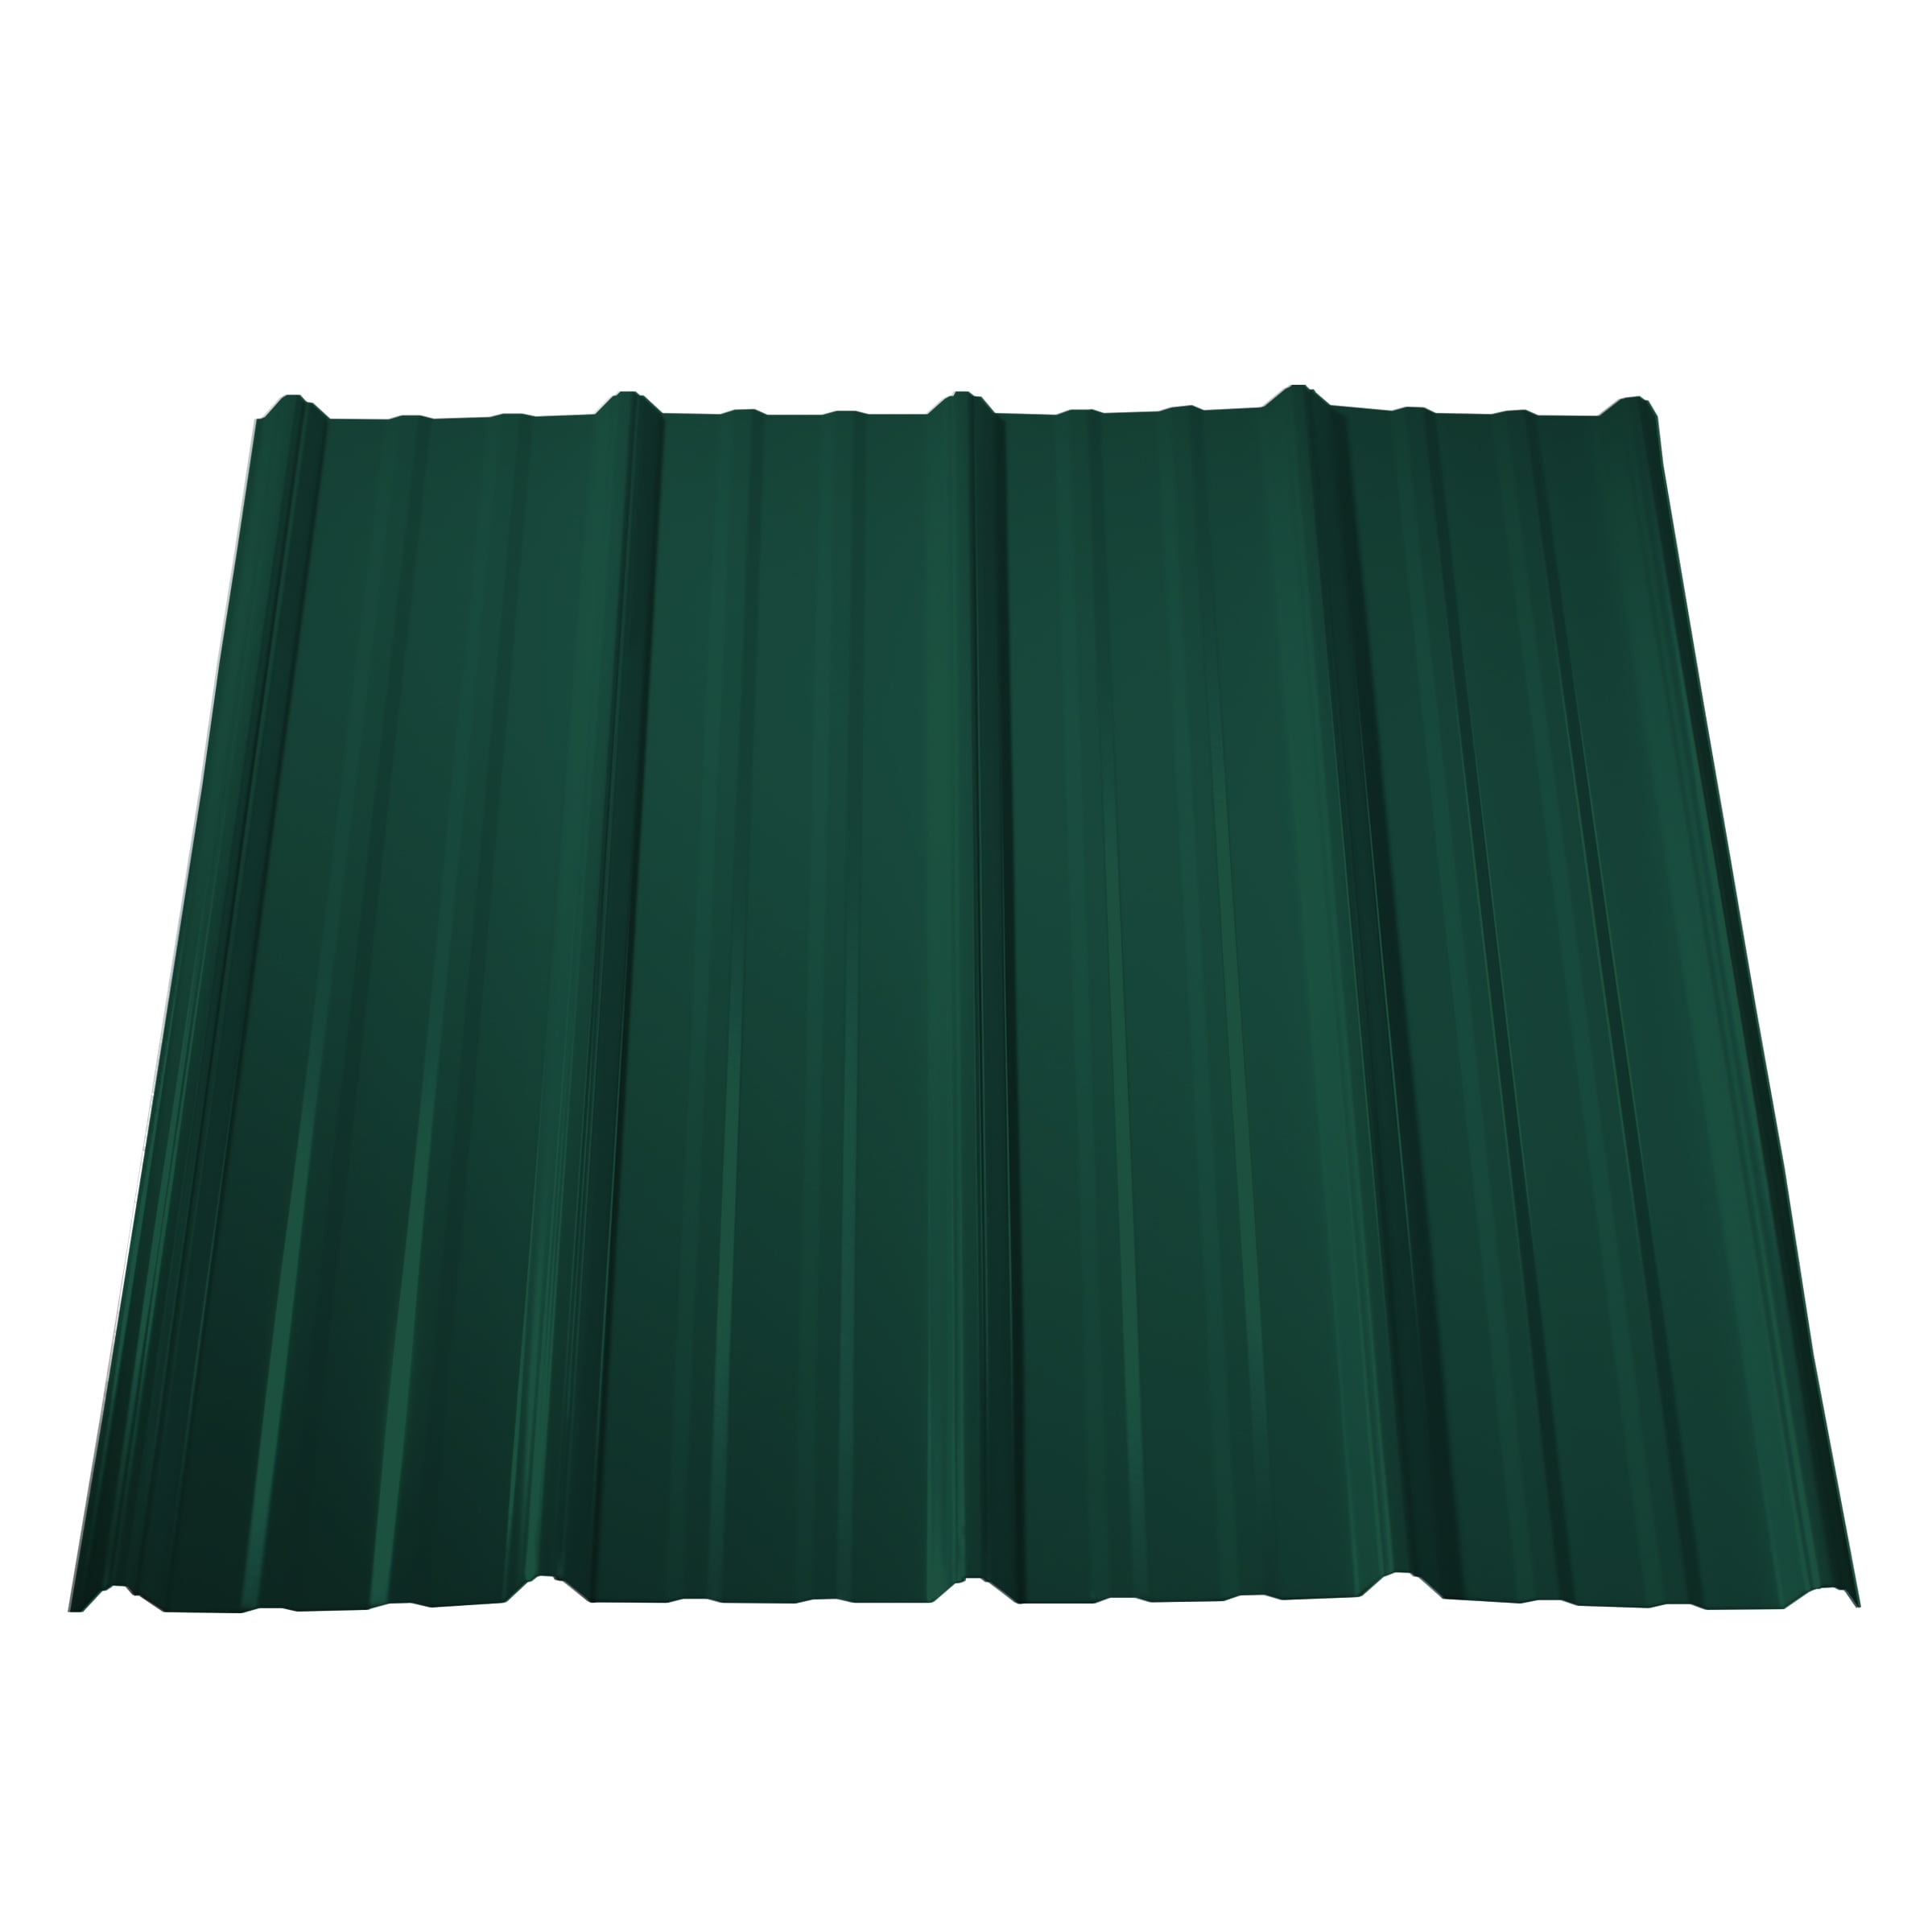 Metal Sales 3-ft x 20-ft Ribbed Forest Green Steel Roof Panel in